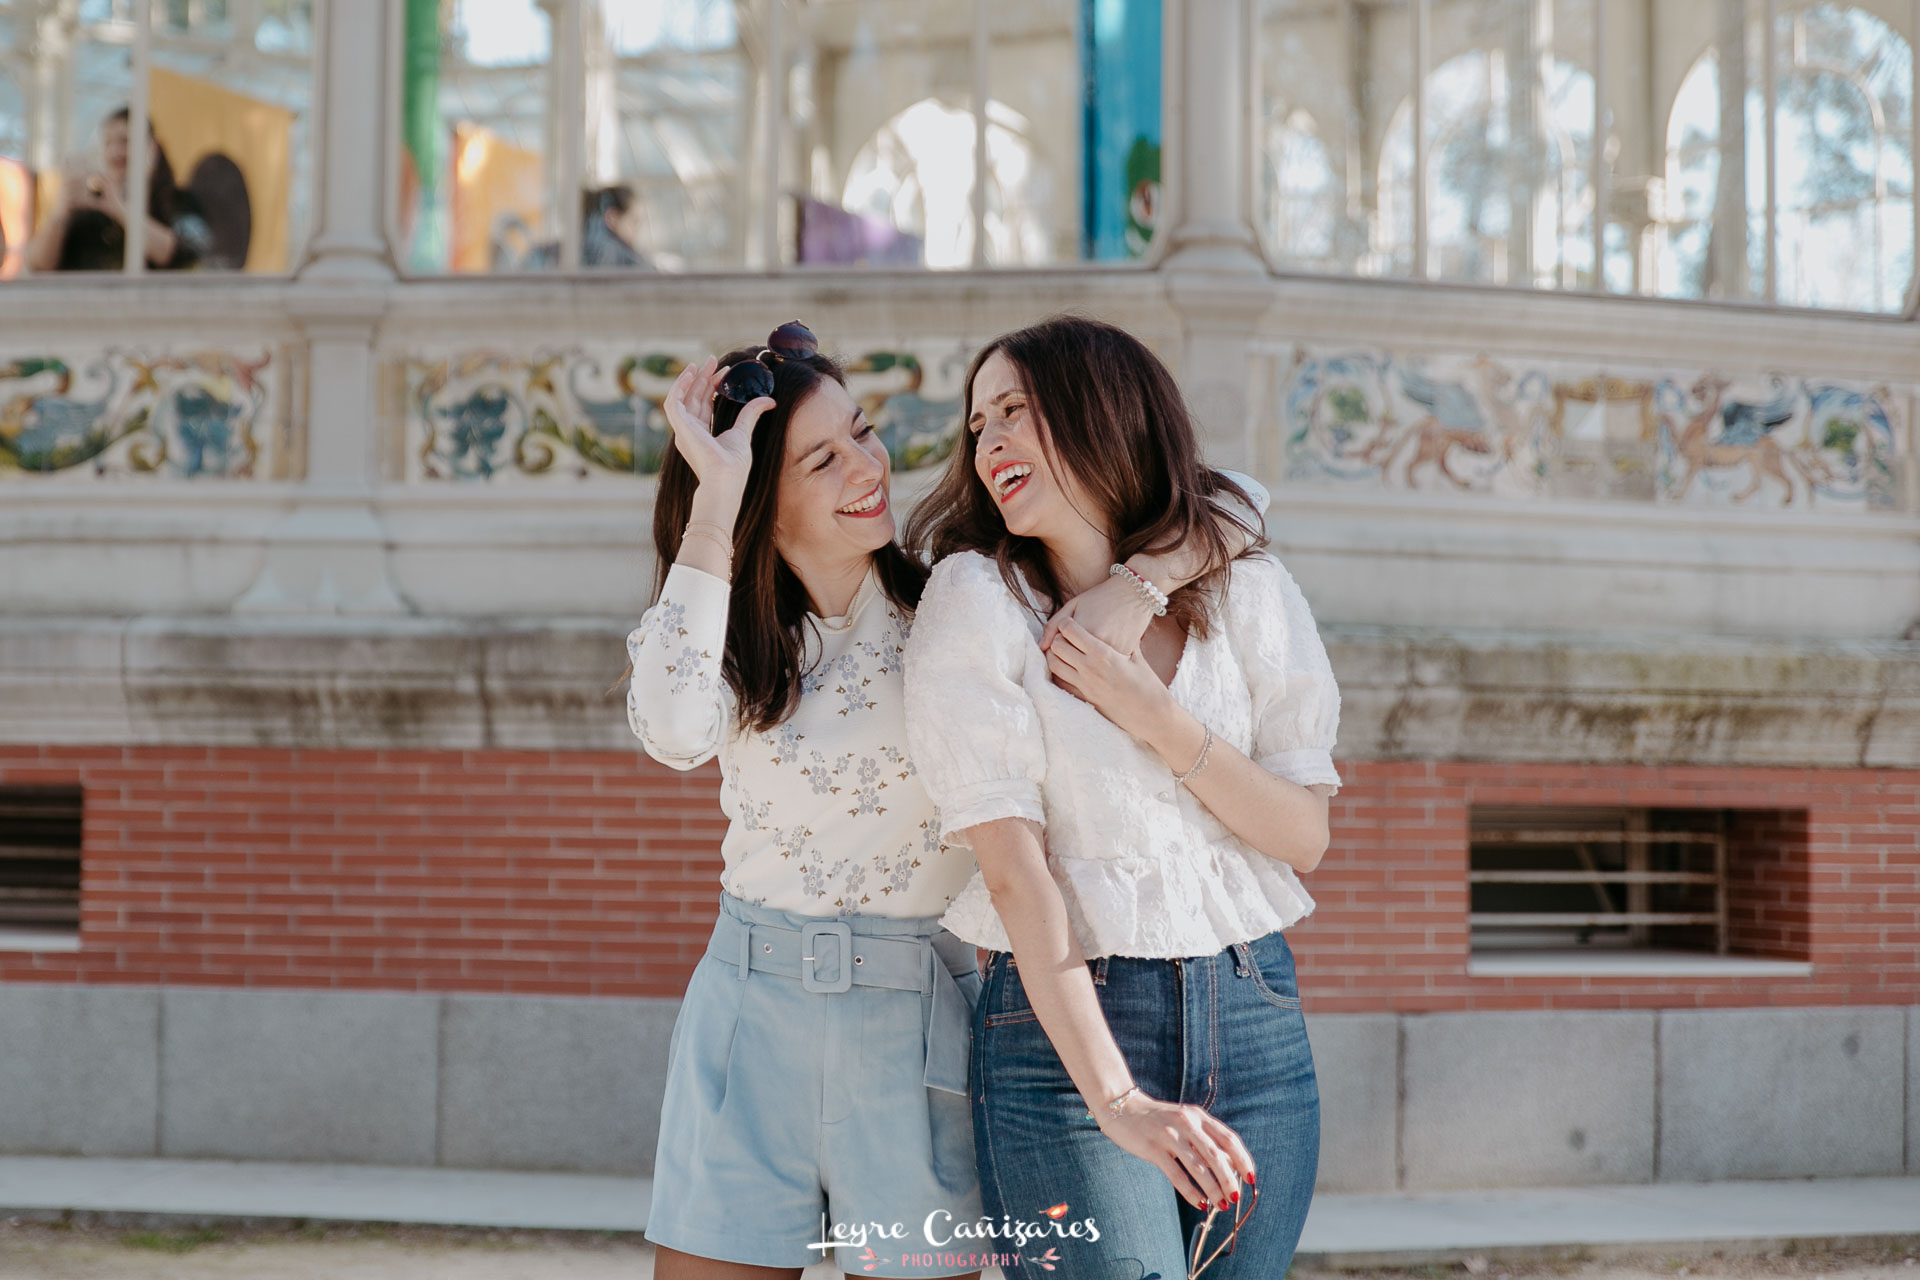 friends photoshoot in nyc